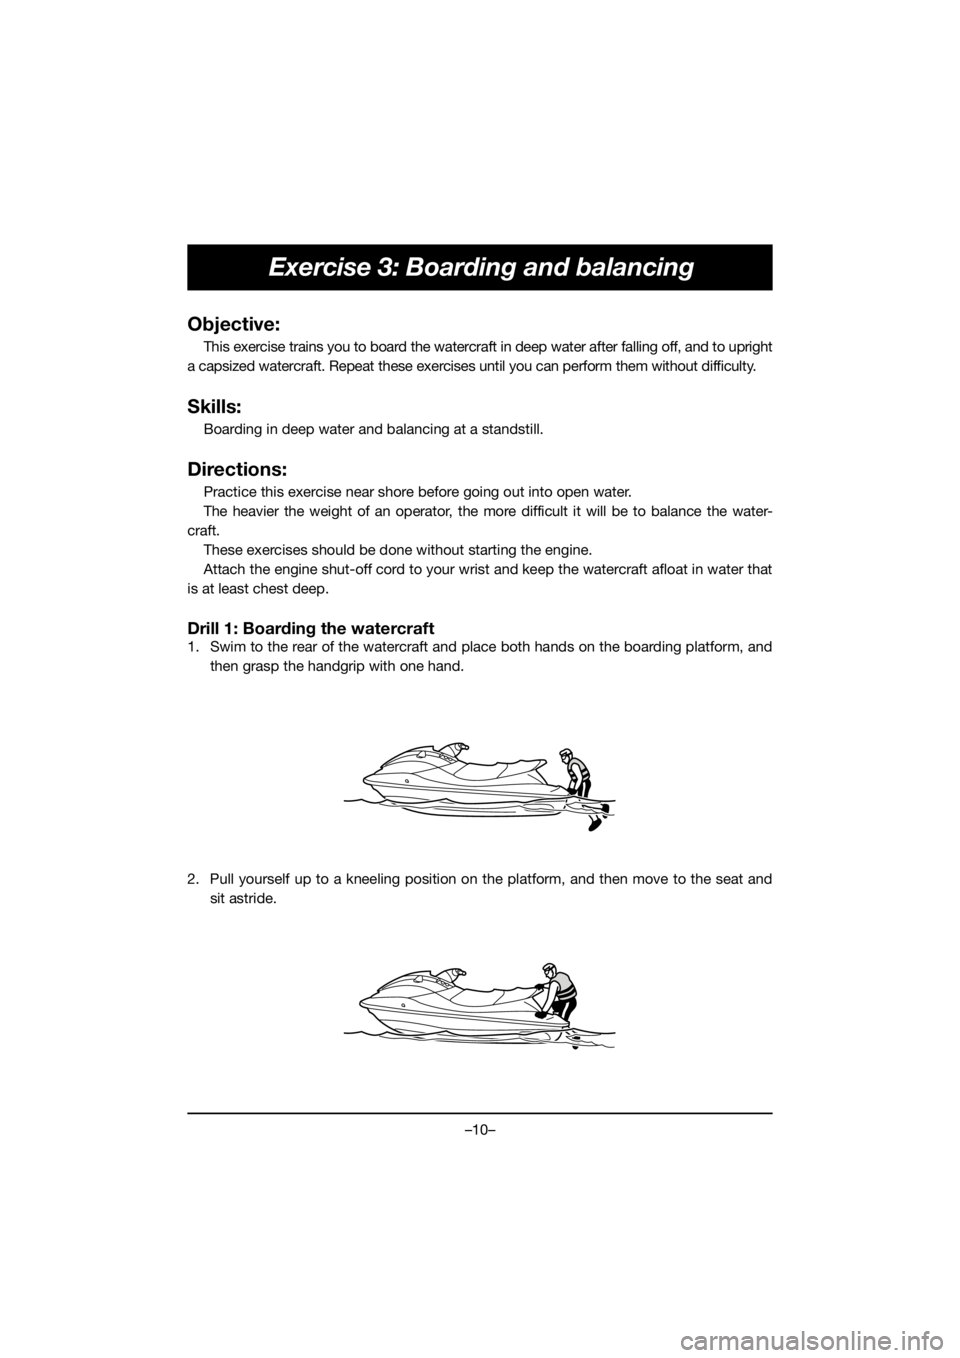 YAMAHA EX 2021  Manuale de Empleo (in Spanish) –10–
Exercise 3: Boarding and balancing
Objective:
This exercise trains you to board the watercraft in deep water after falling off, and to upright
a capsized watercraft. Repeat these exercises un